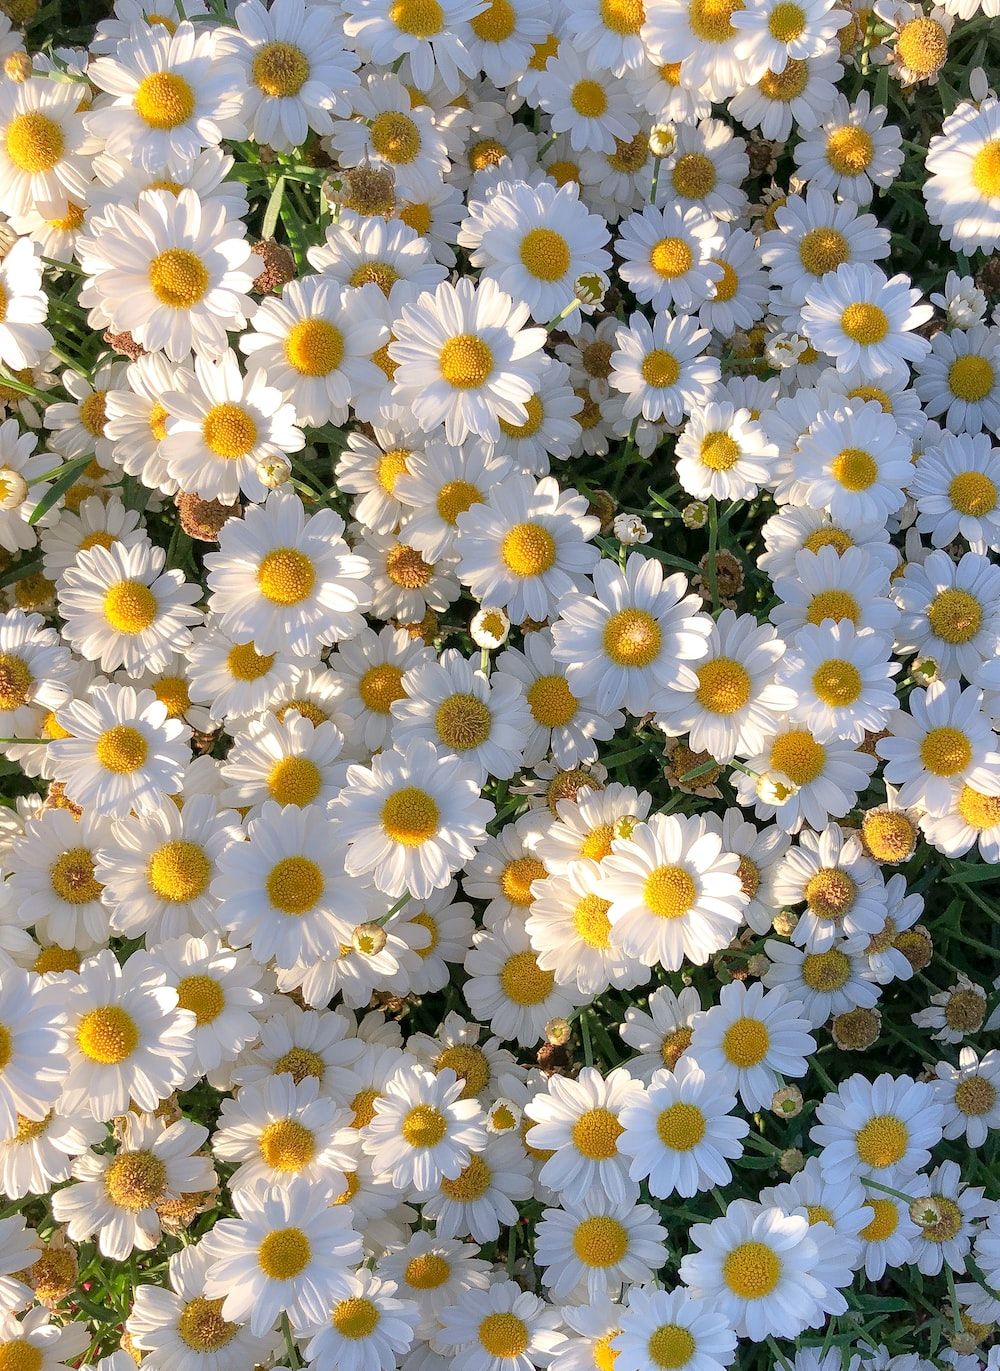 A close up of some flowers in the grass - Daisy